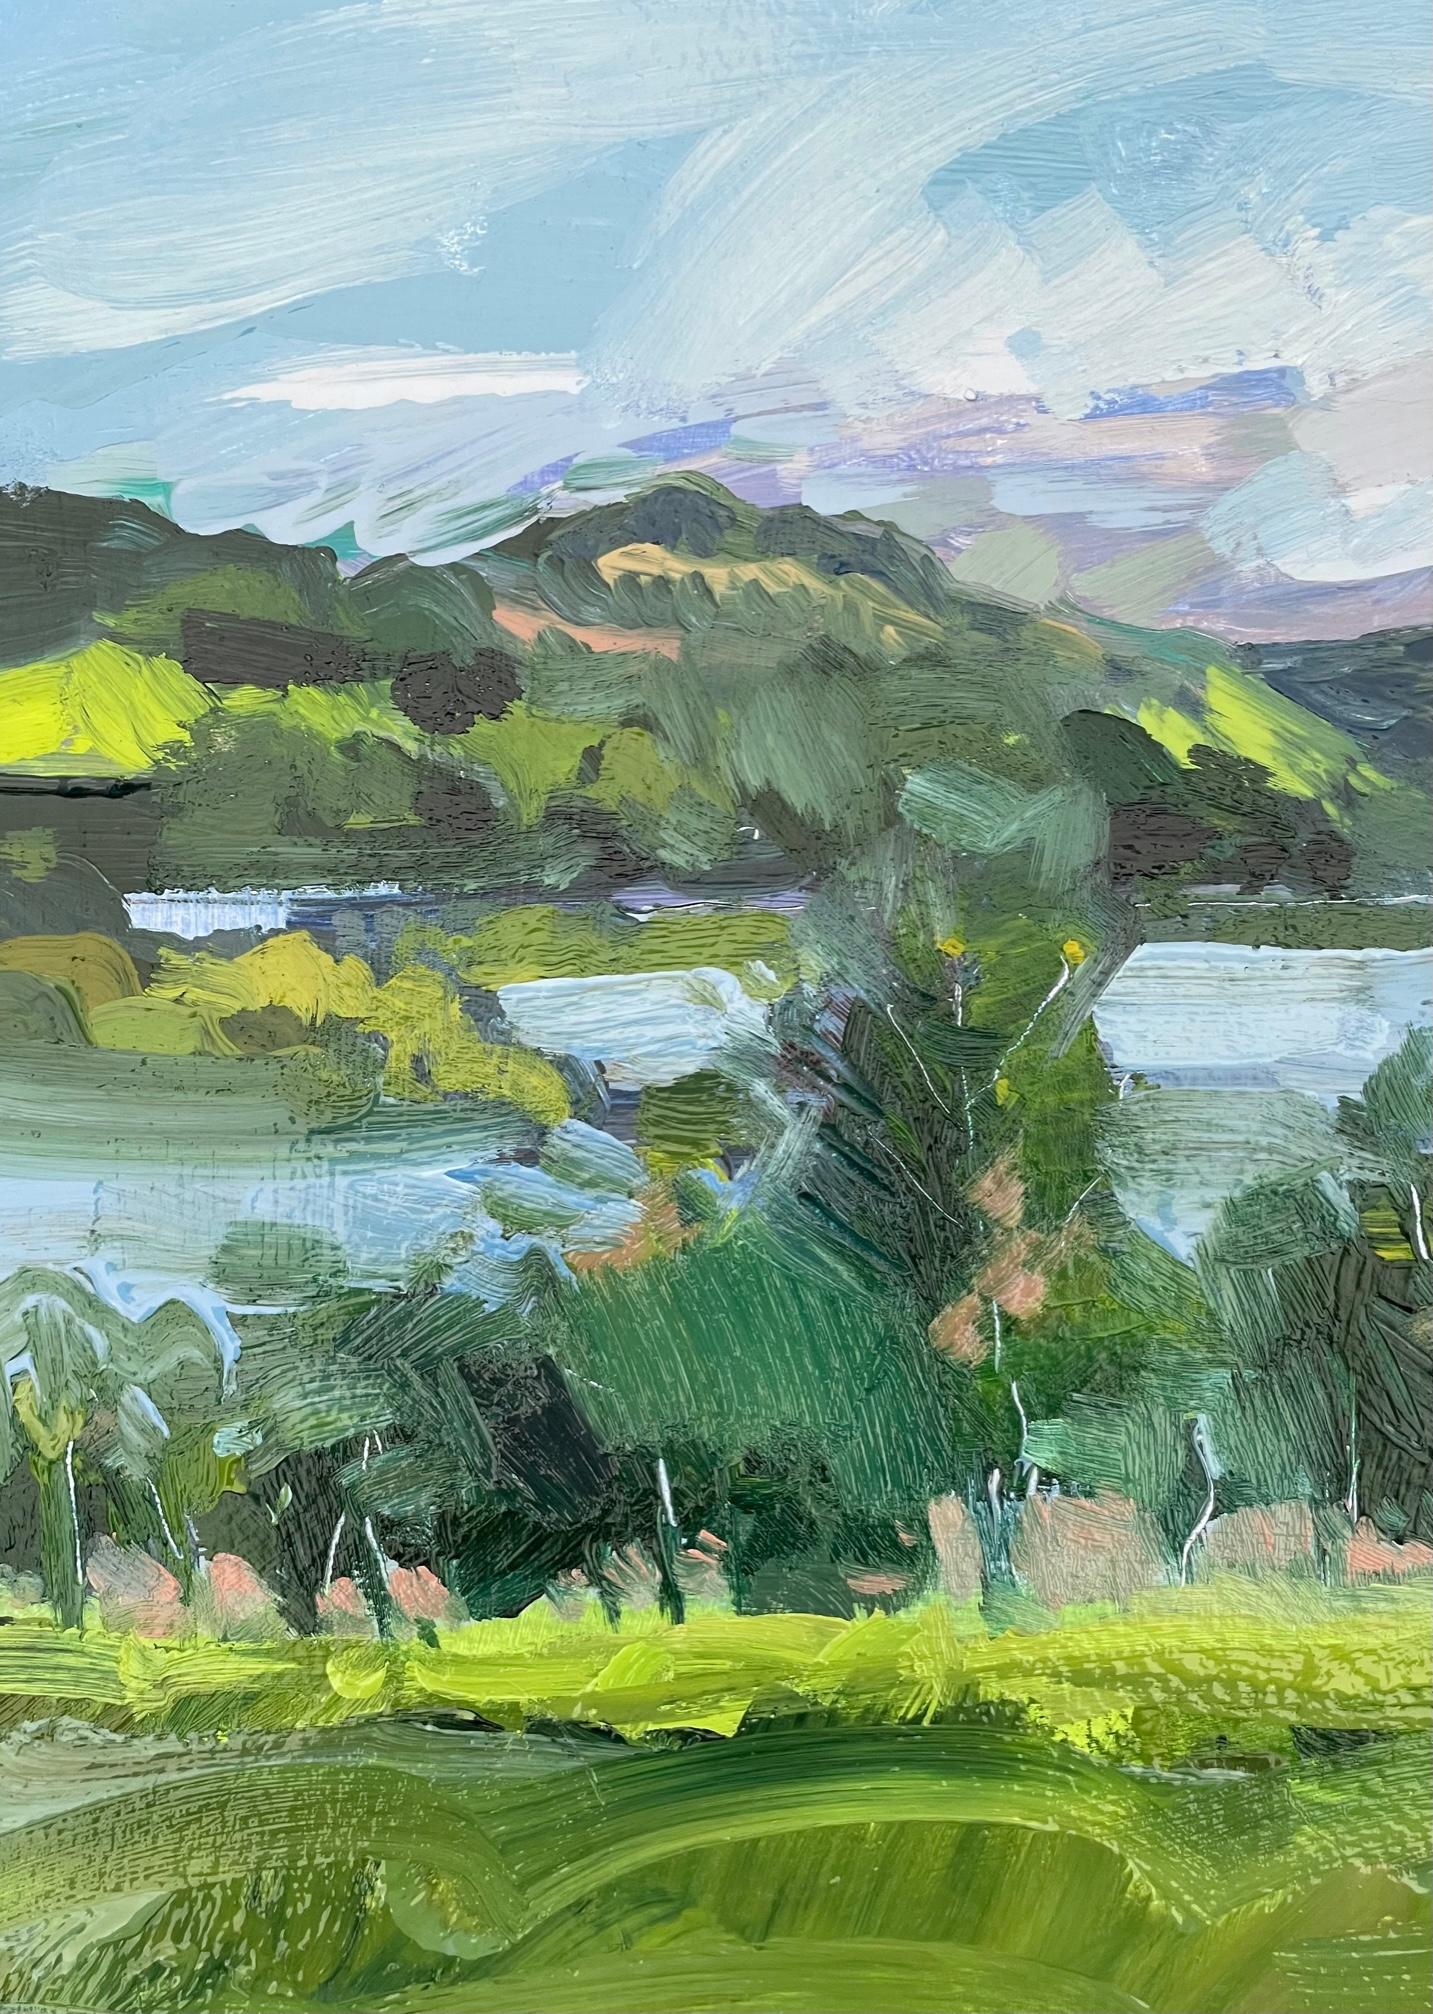 Still Day By The Loch, Scotland, Original painting, Landscape, Nature, Green art - Impressionist Painting by Natalie Bird